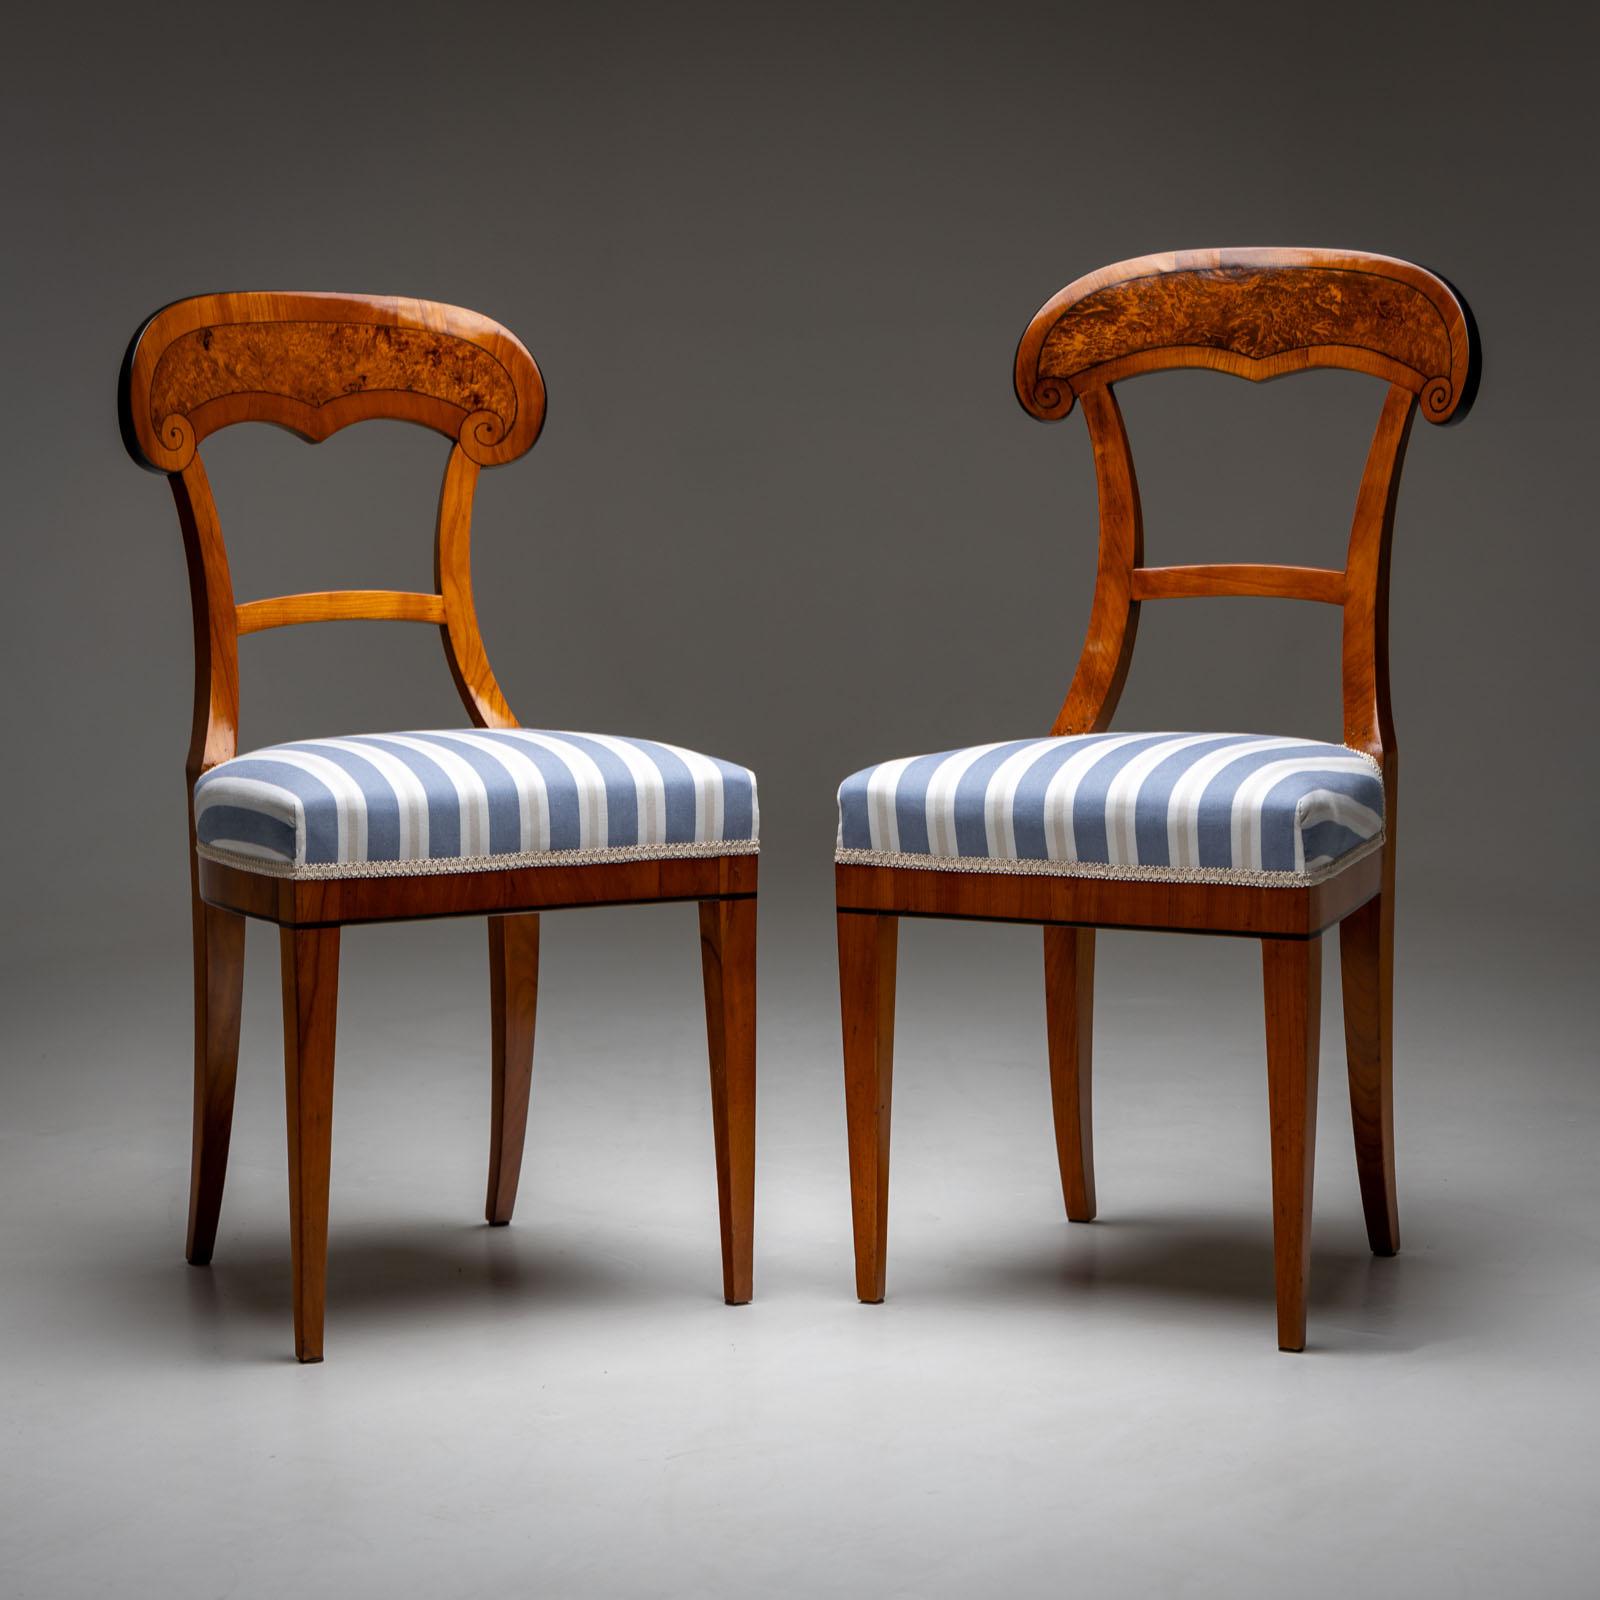 A near pair of Biedermeier shovel chairs in cherry with burl veneer and ebonized thread inlays on the backrest. The chairs stand on square tapered legs, with the rear ones slightly curved. The seats are upholstered and covered with a light blue and